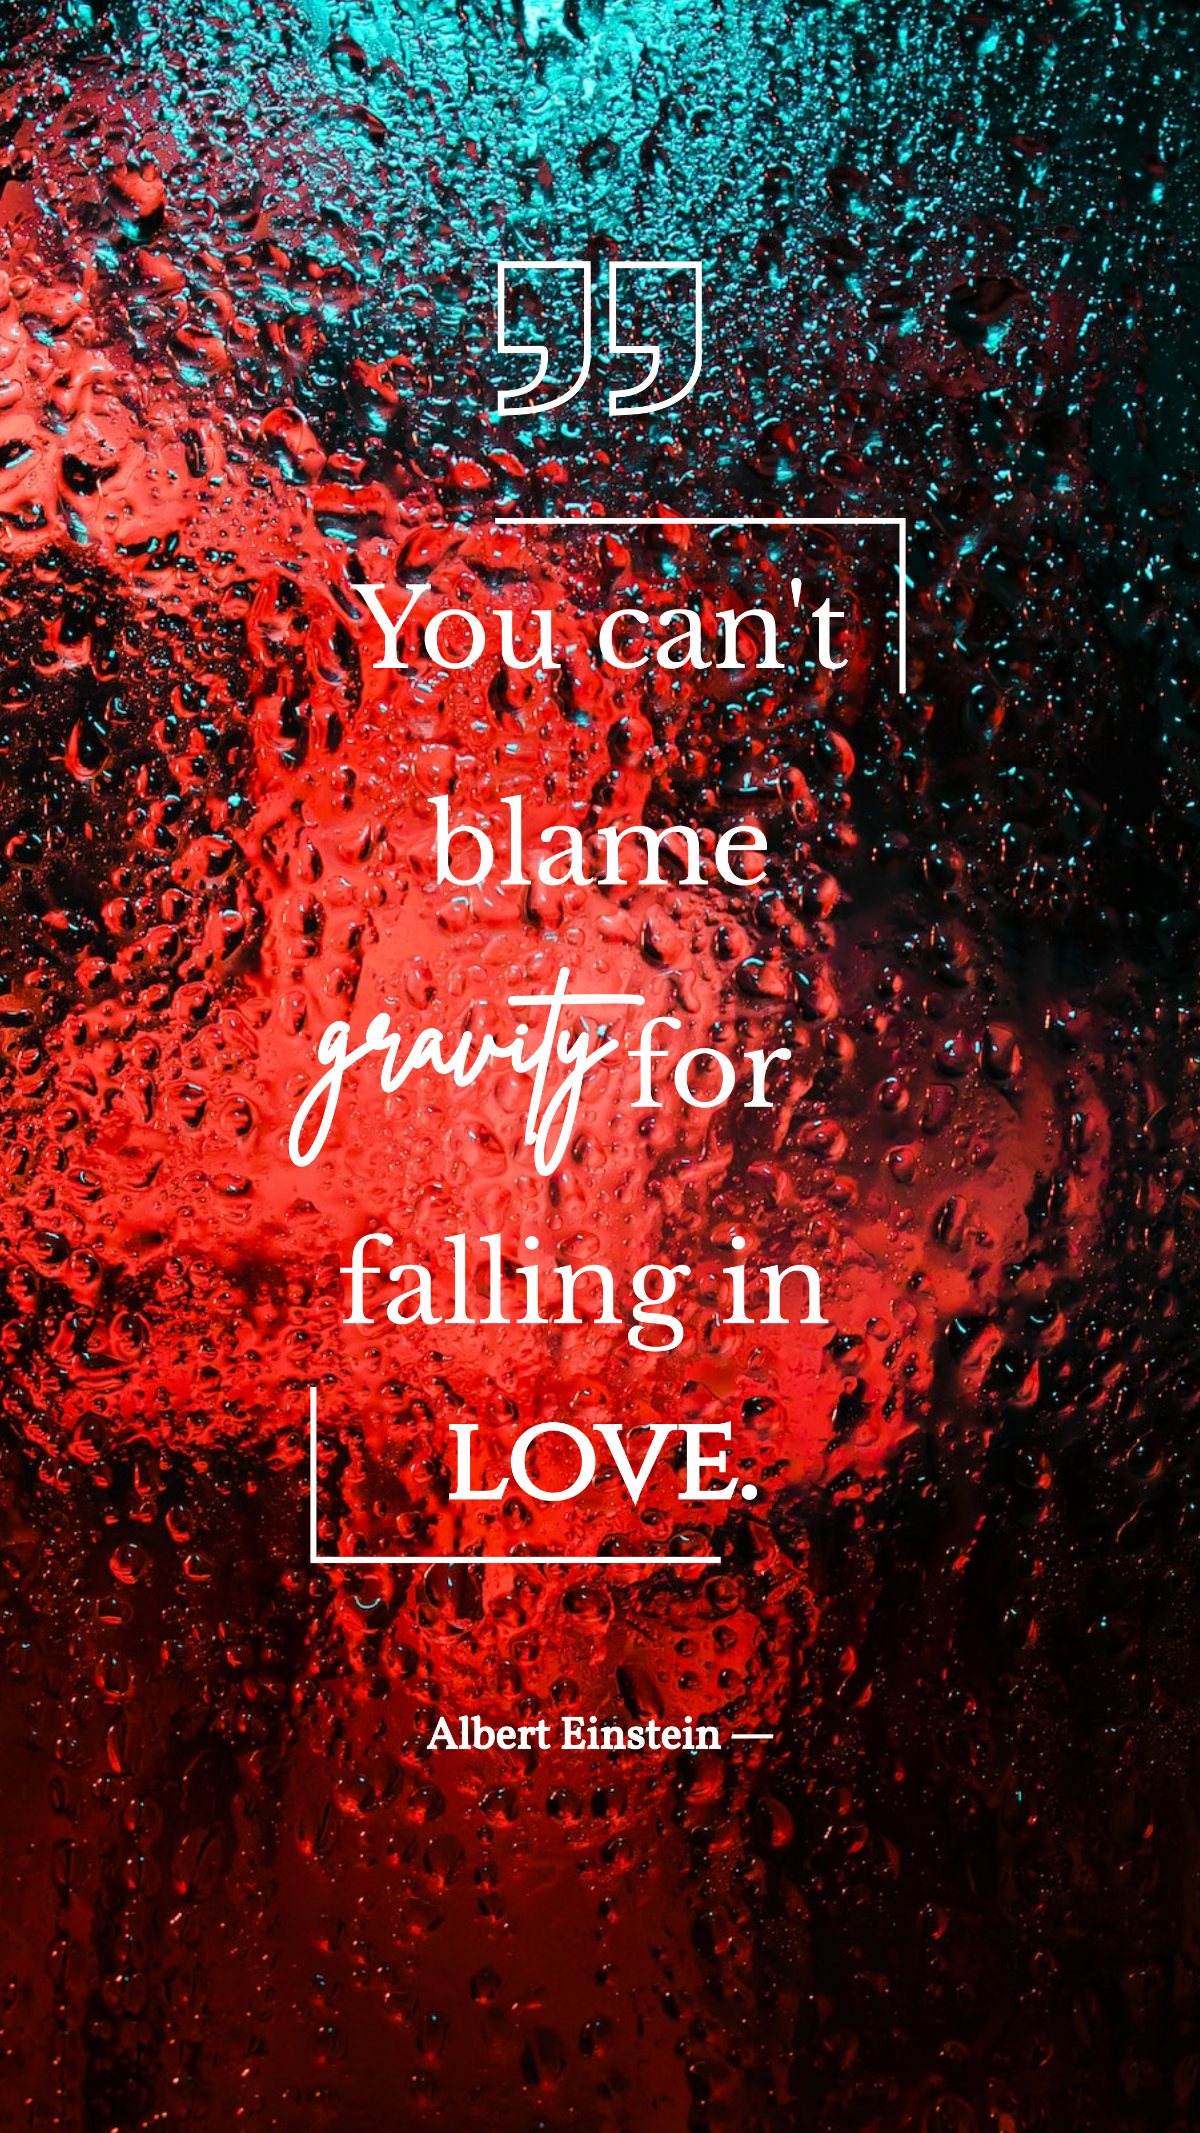 Albert Einstein — You can't blame gravity for falling in love.